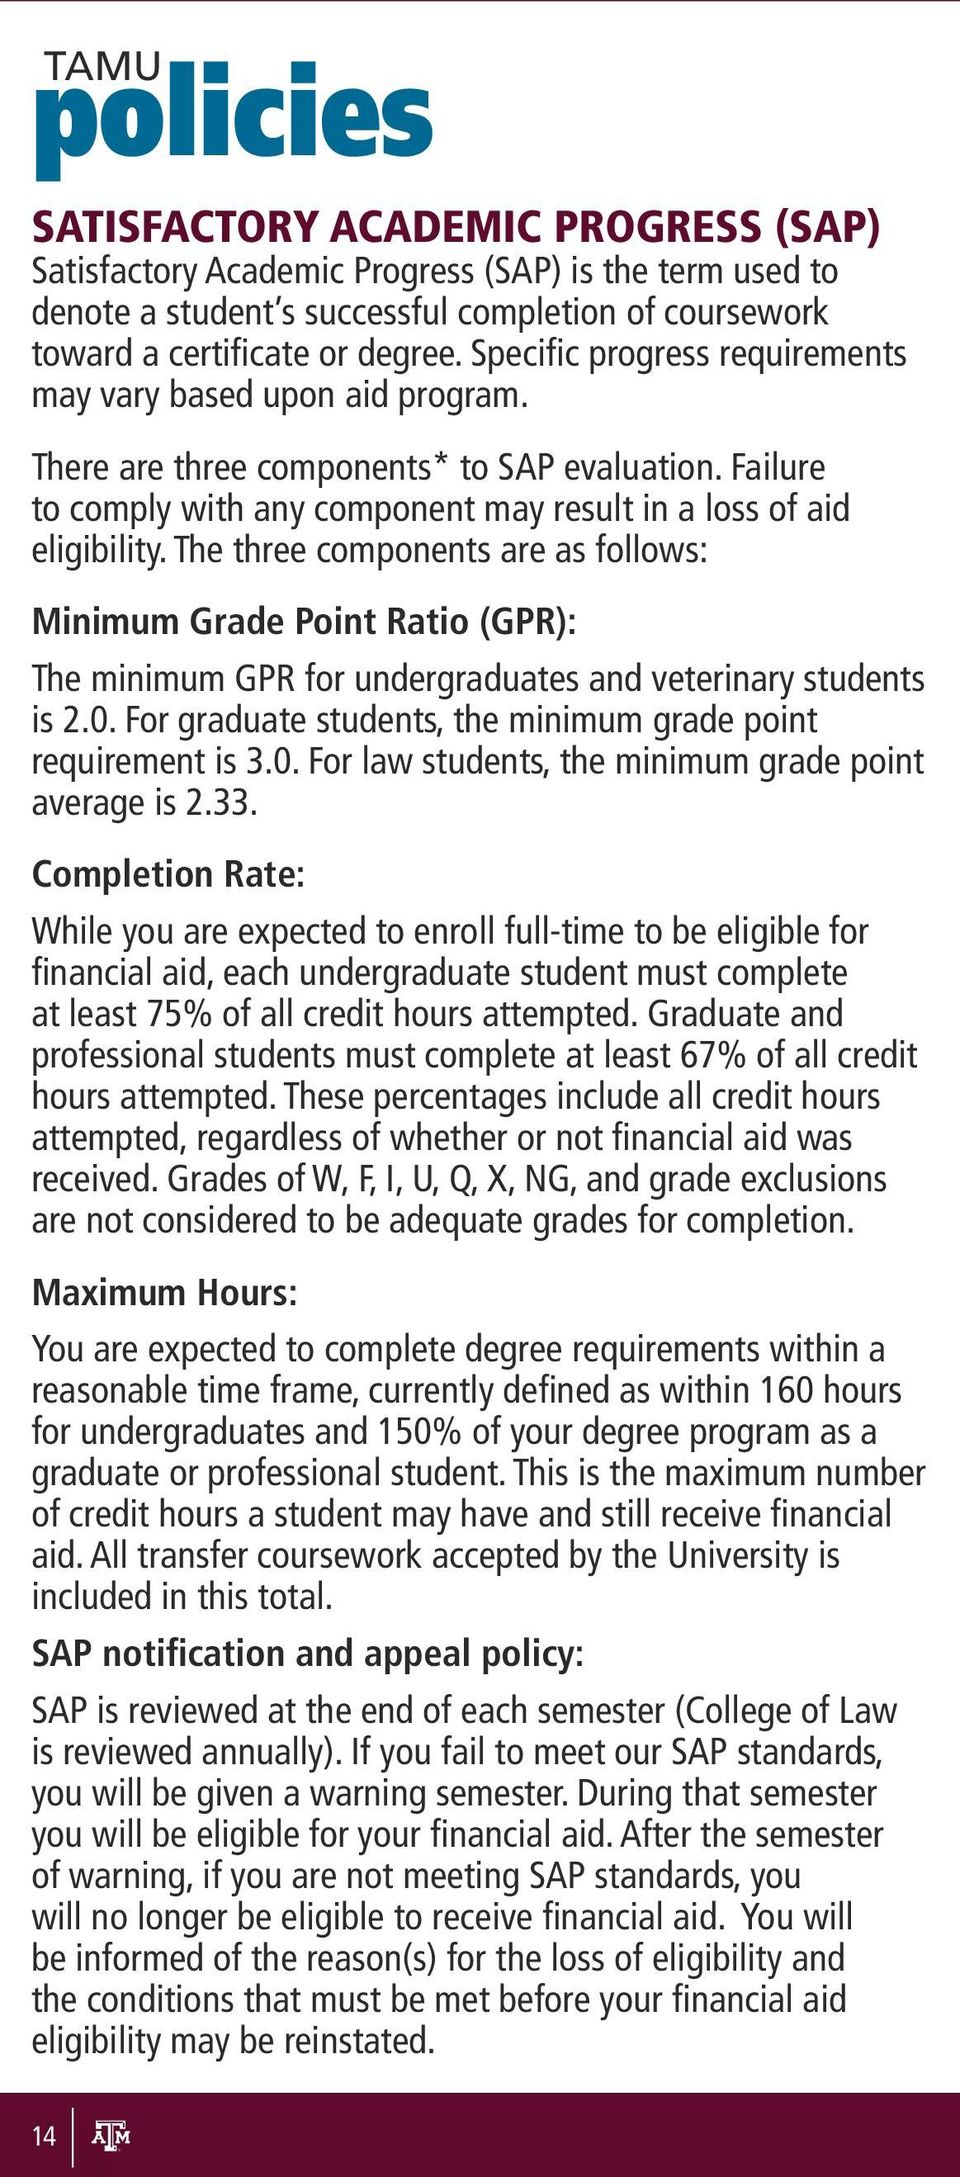 The three components are as follows: Minimum Grade Point Ratio (GPR): The minimum GPR for undergraduates and veterinary students is 2.0.